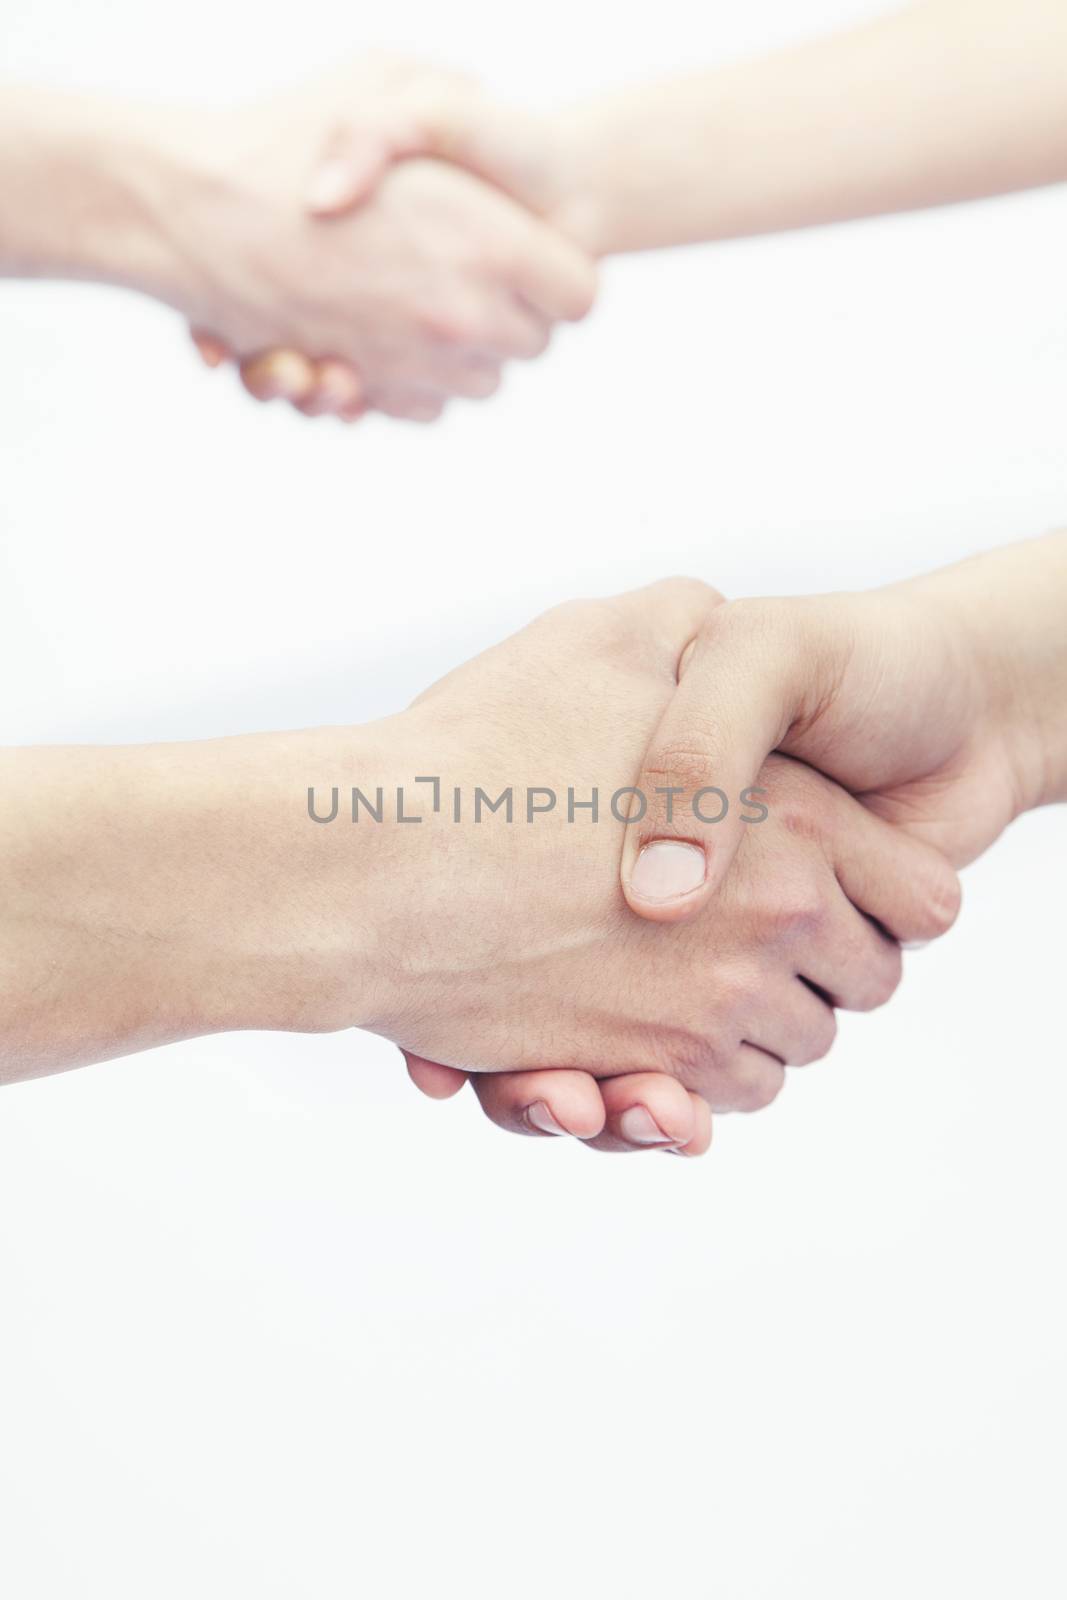 Four young people shaking hands, close-up, studio shot